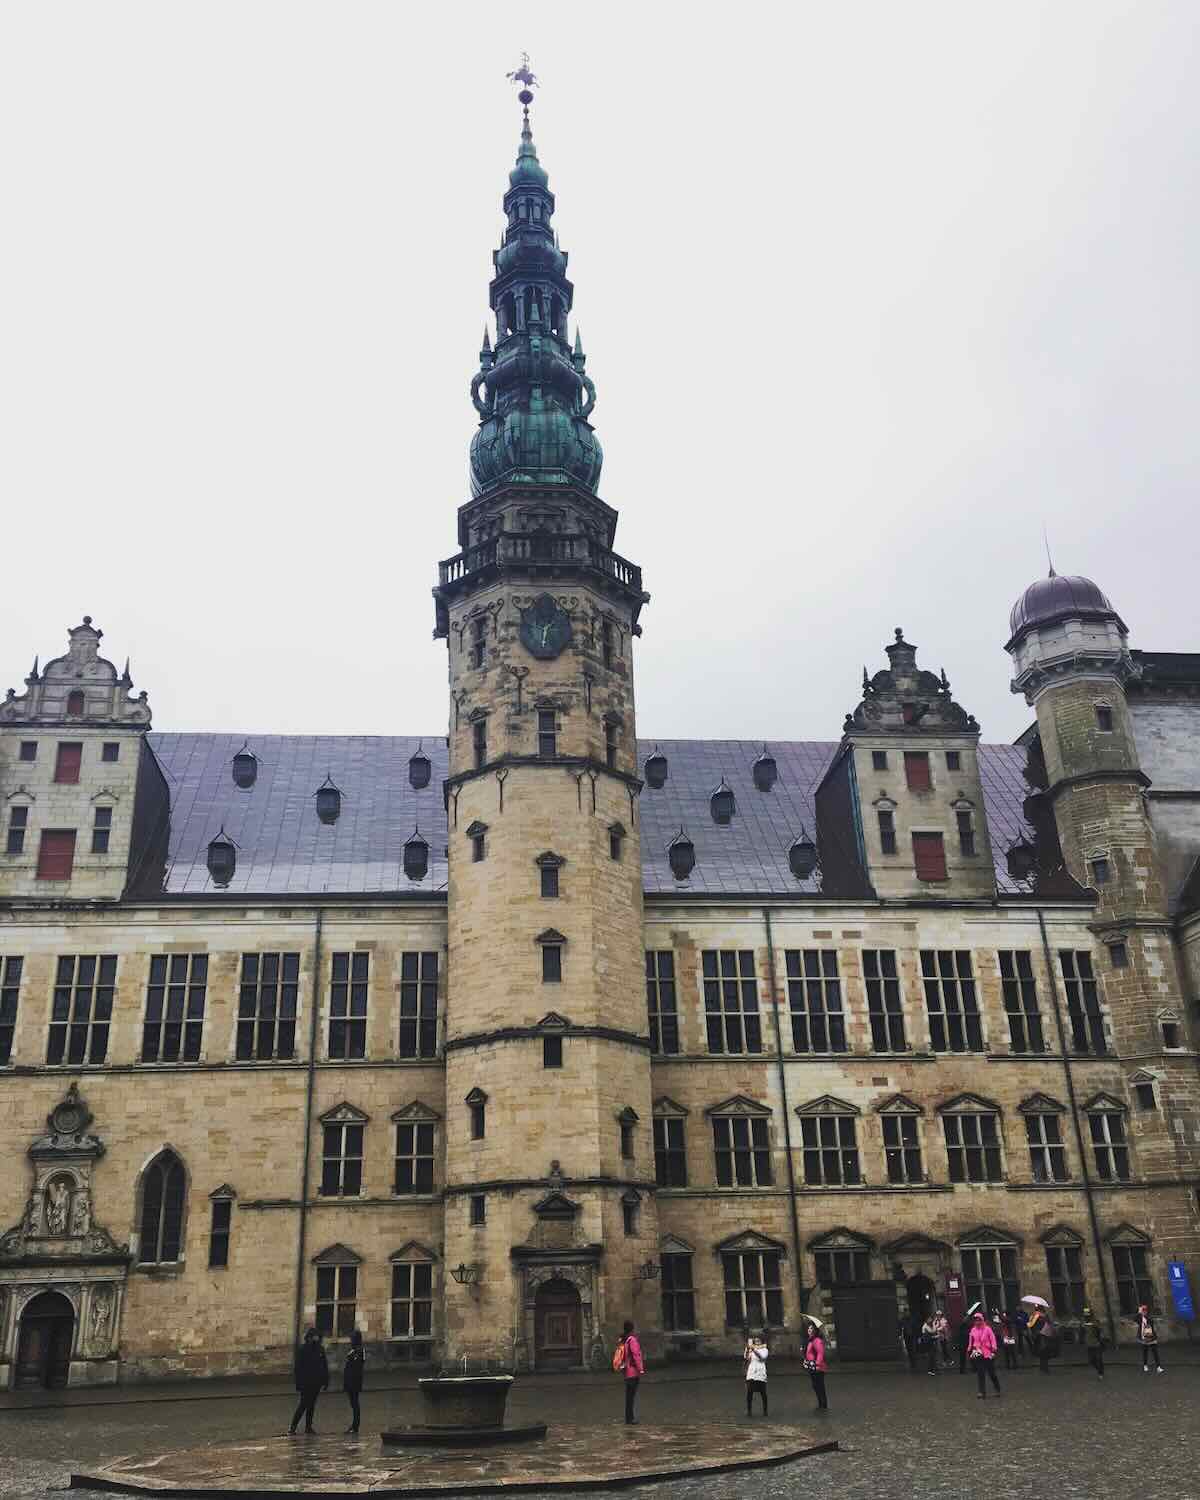 Exterior view of Kronborg Castle with its imposing Renaissance architecture against a cloudy sky.